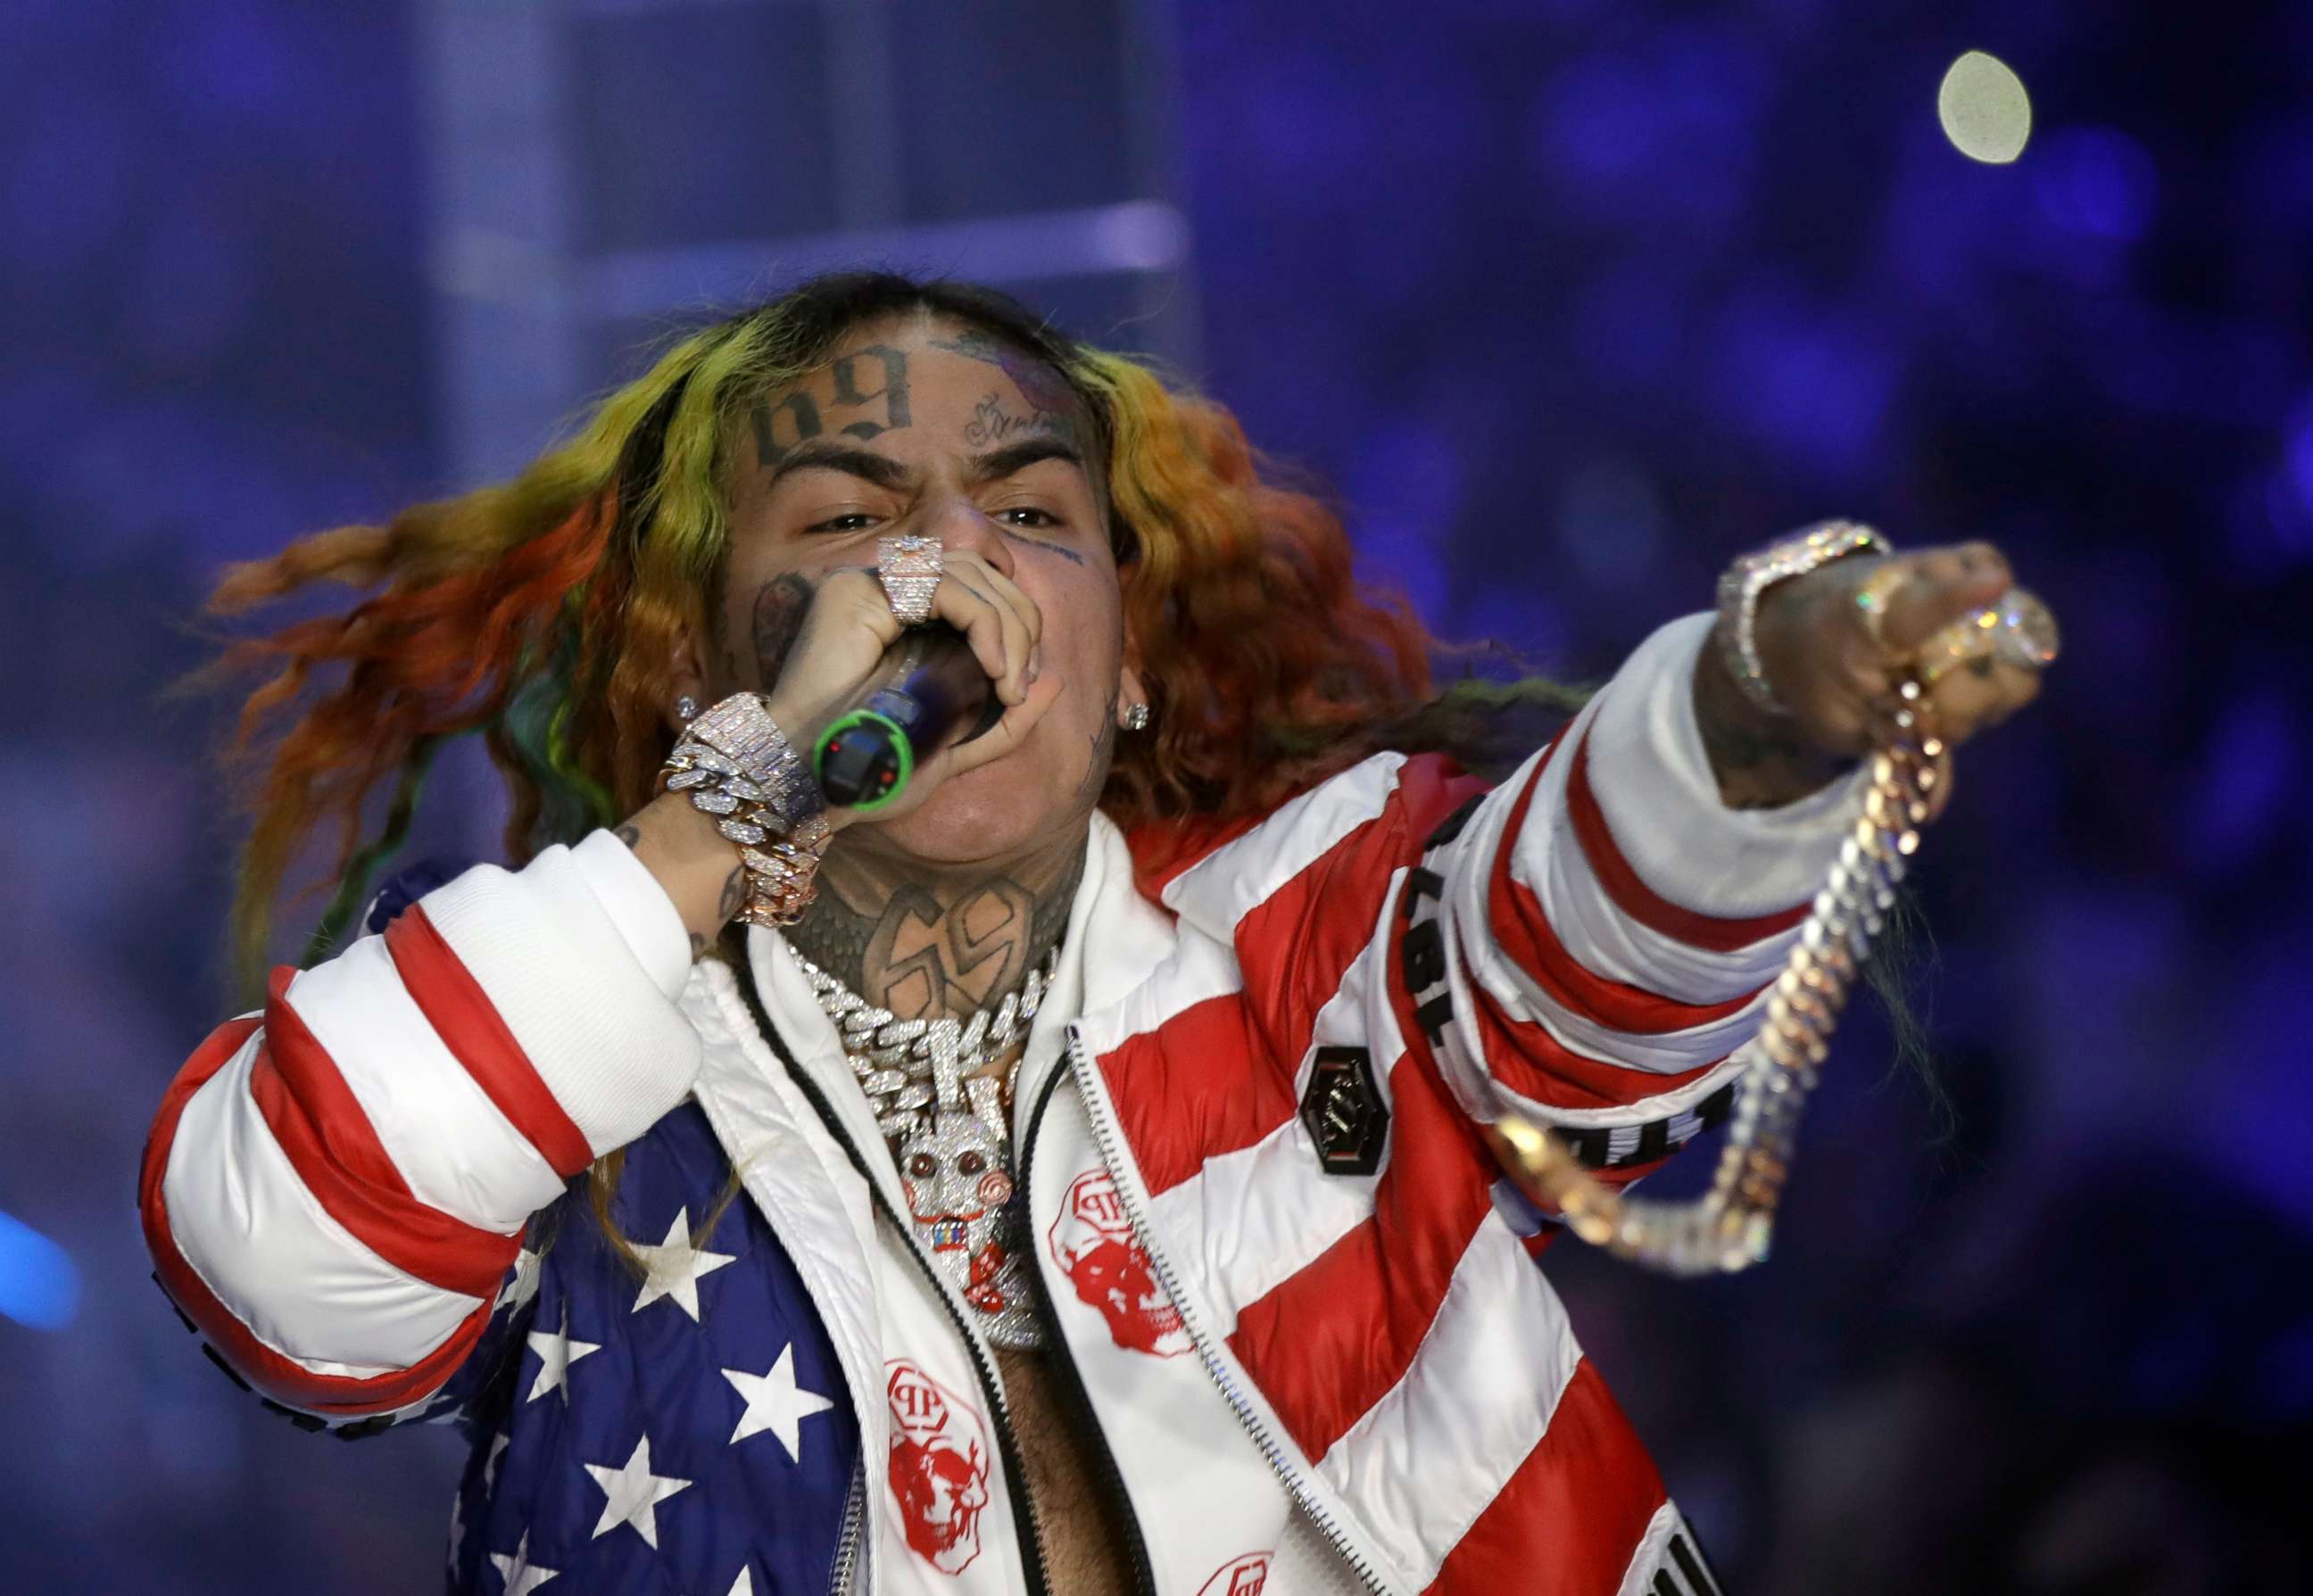 PHOTO: FILE- In this Sept. 21, 2018, file photo rapper Daniel Hernandez, known as Tekashi 6ix9ine, performs during the Philipp Plein women's 2019 Spring-Summer collection during the Fashion Week in Milan, Italy. 